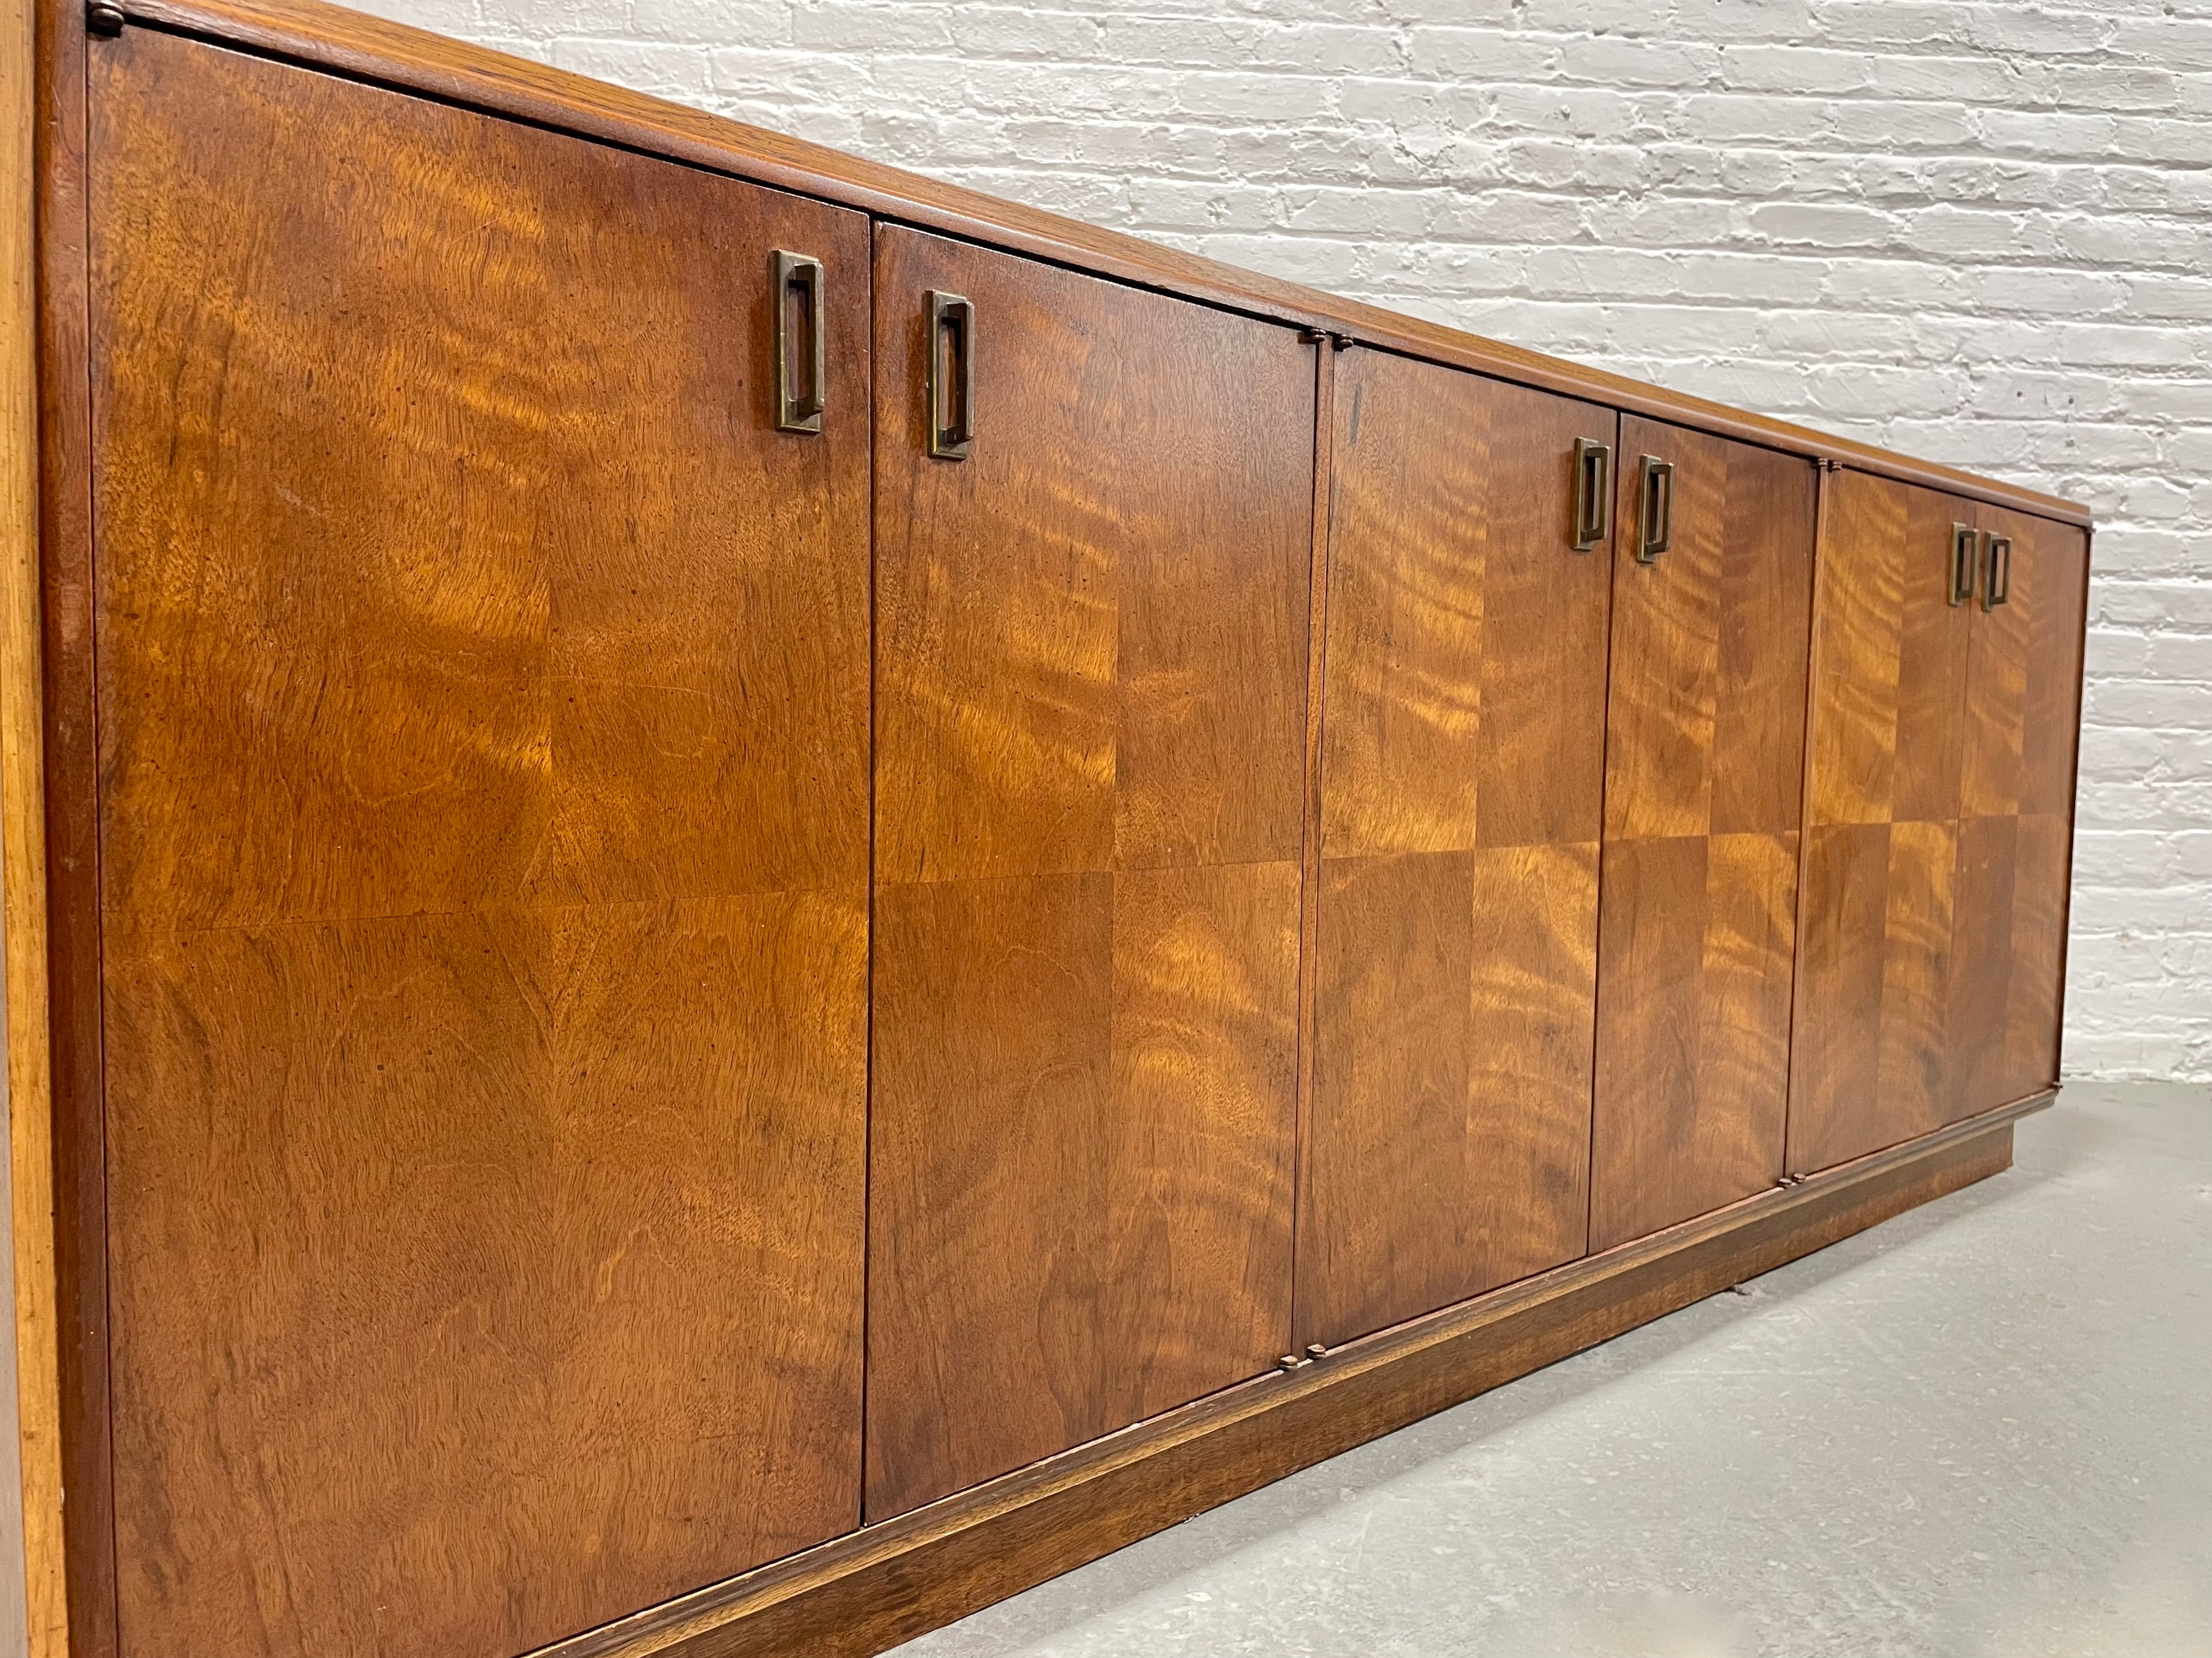 LONG + MAGNIFICENT Mid Century Modern Walnut CREDENZA / Media Stand / Sideboard by Founders